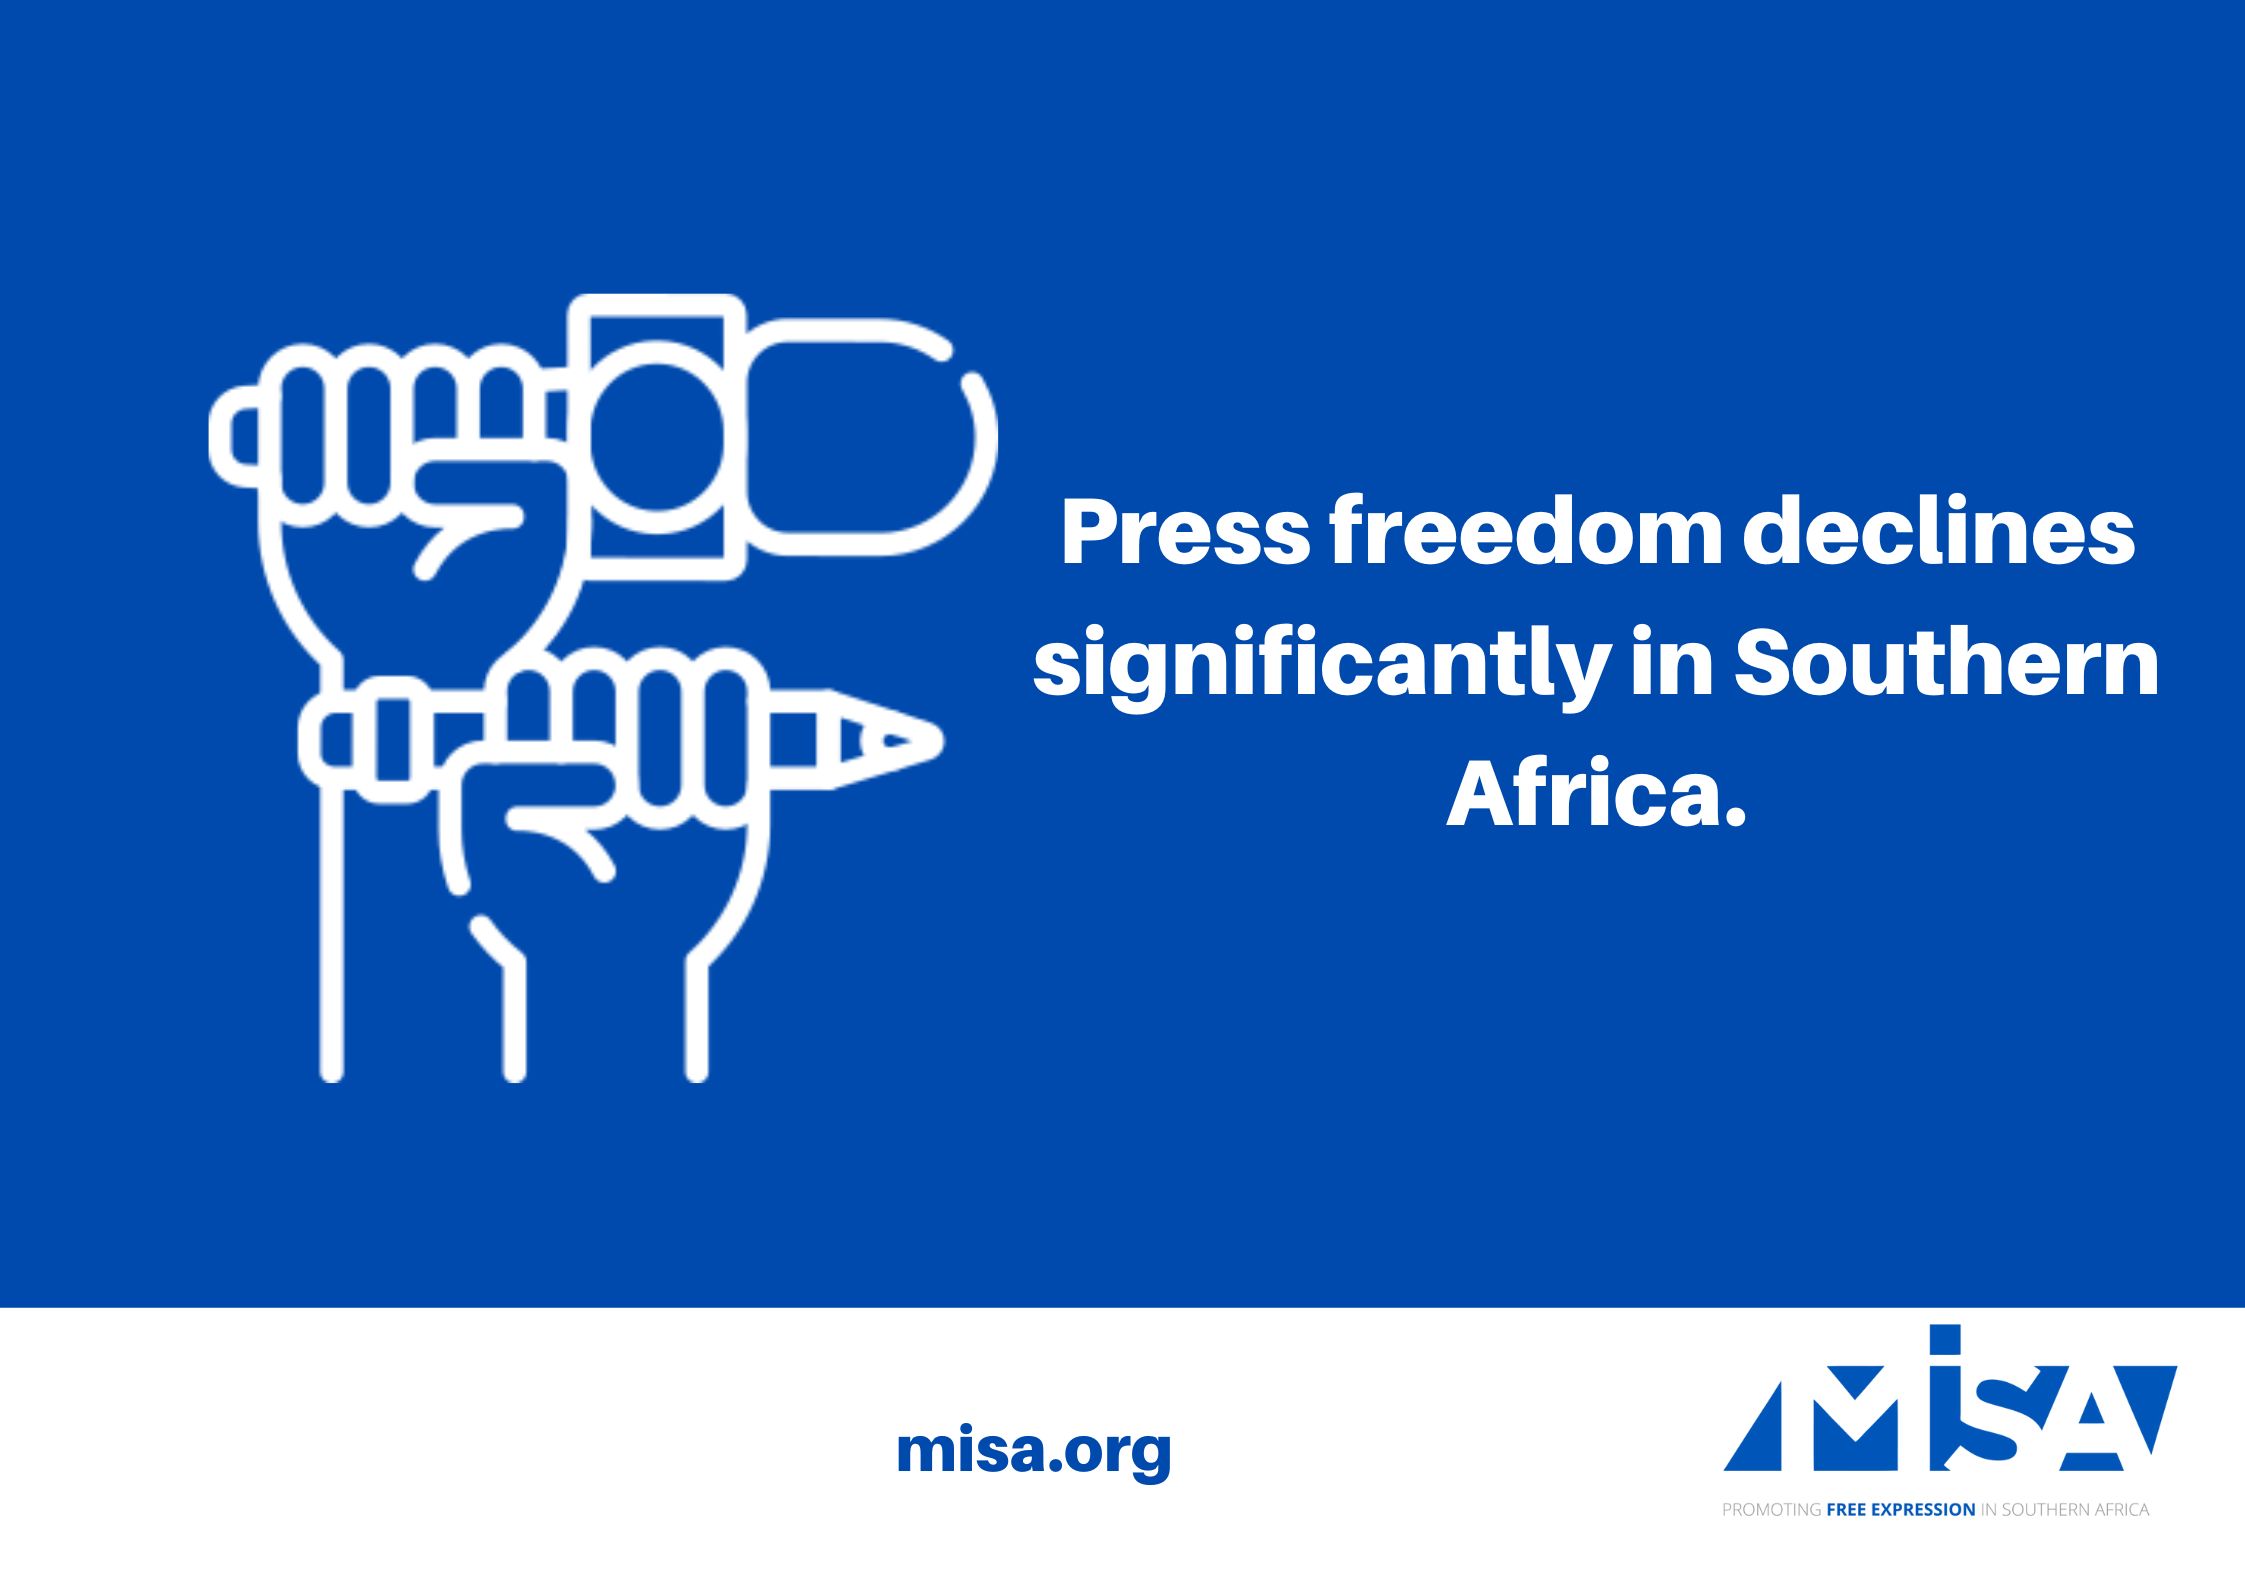 Press freedom declines significantly in Southern Africa